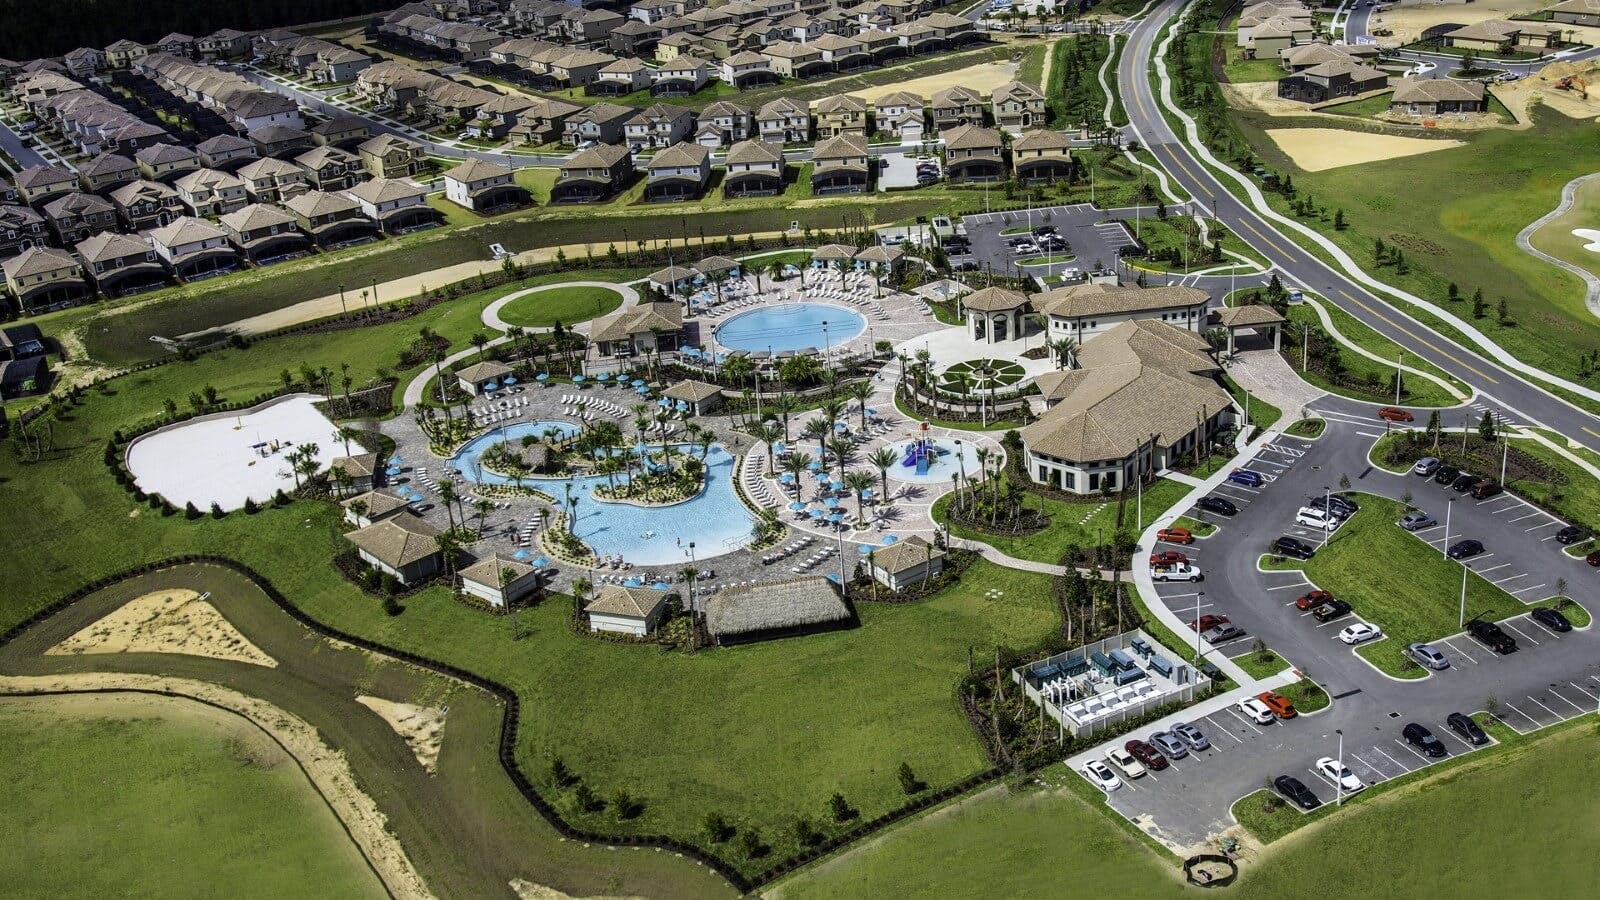 Aerial view of Championsgate Resort community pools, clubhouse, sports courts, and vacation rentals